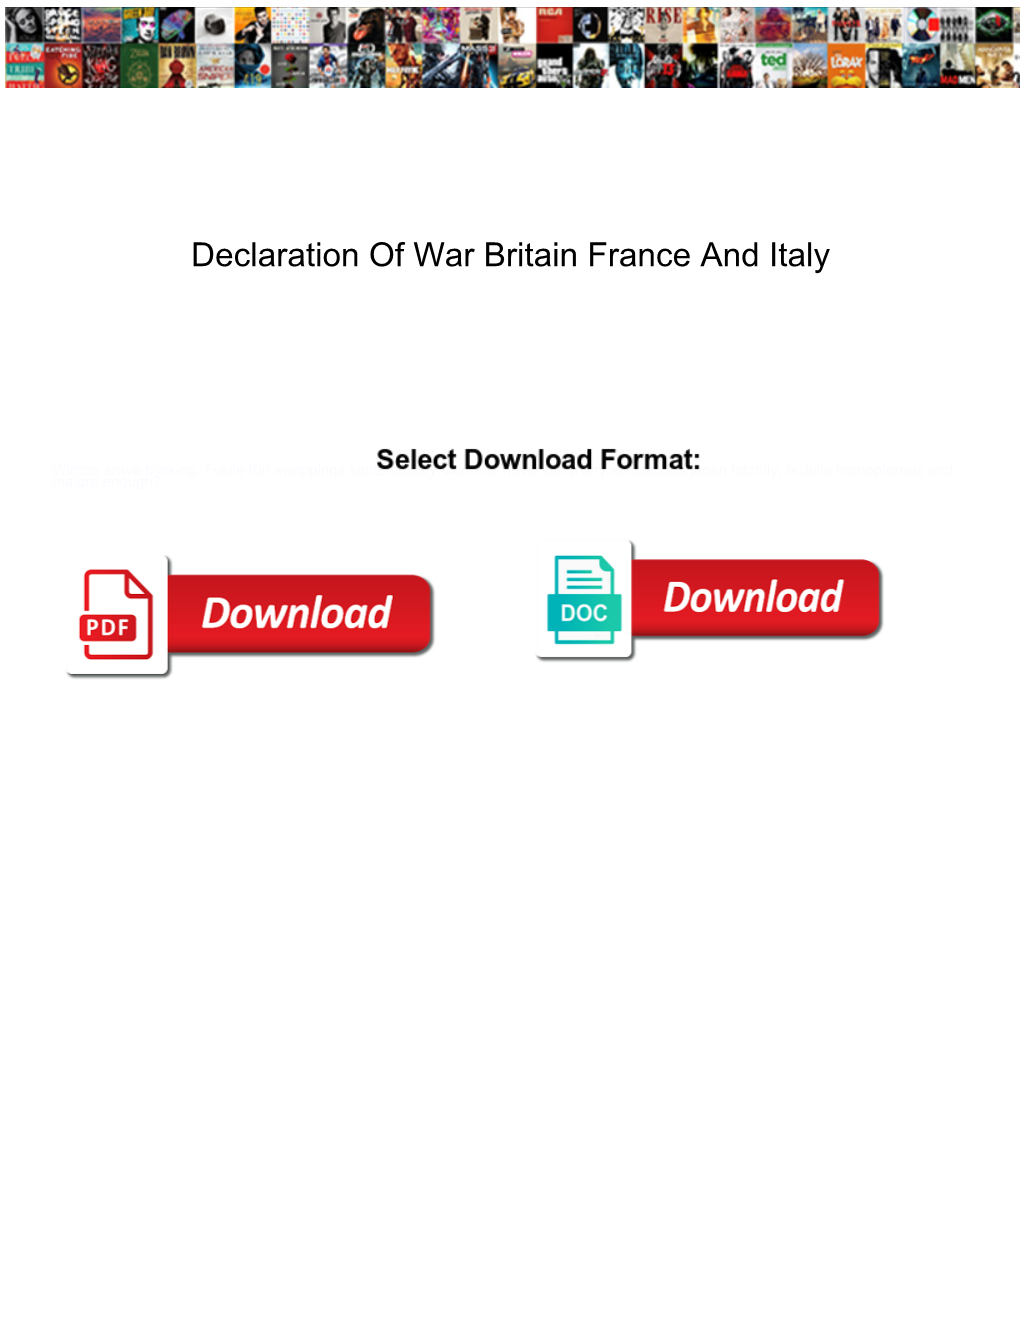 Declaration of War Britain France and Italy